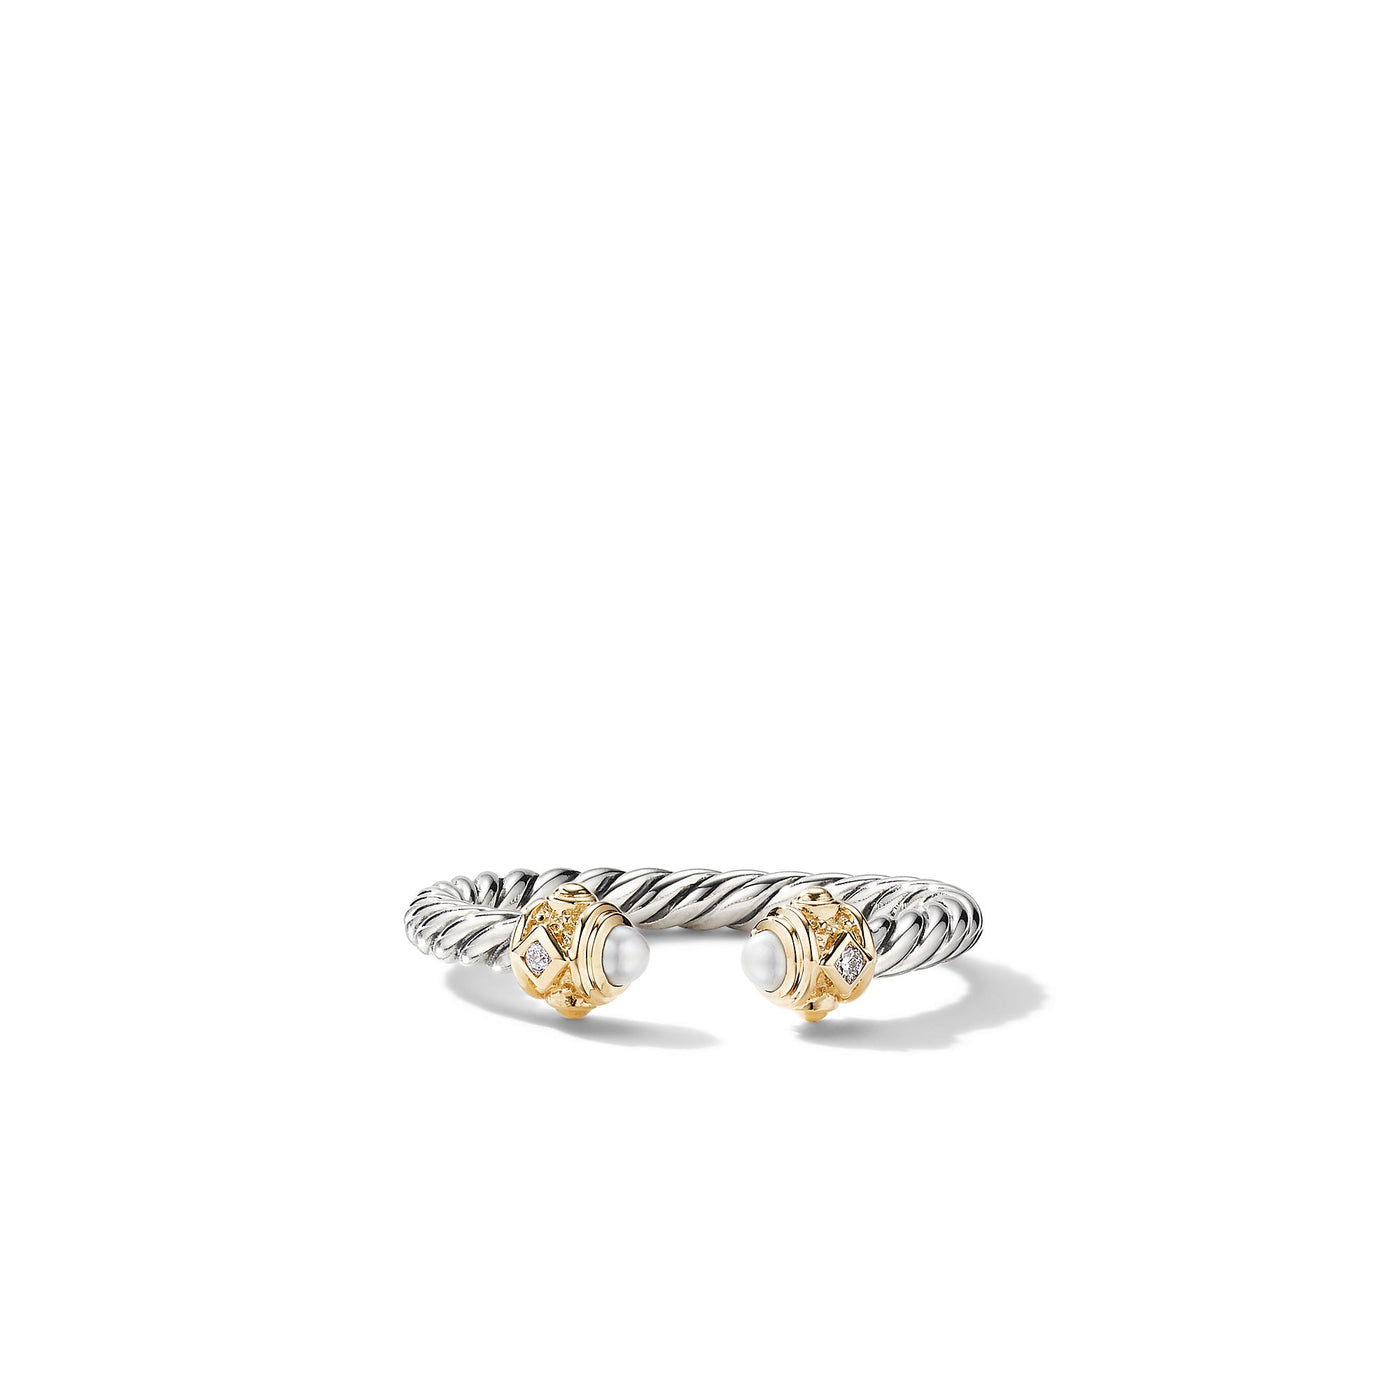 Renaissance Ring in Sterling Silver with 14K Yellow Gold\, Pearls and Diamonds\, 2.3mm